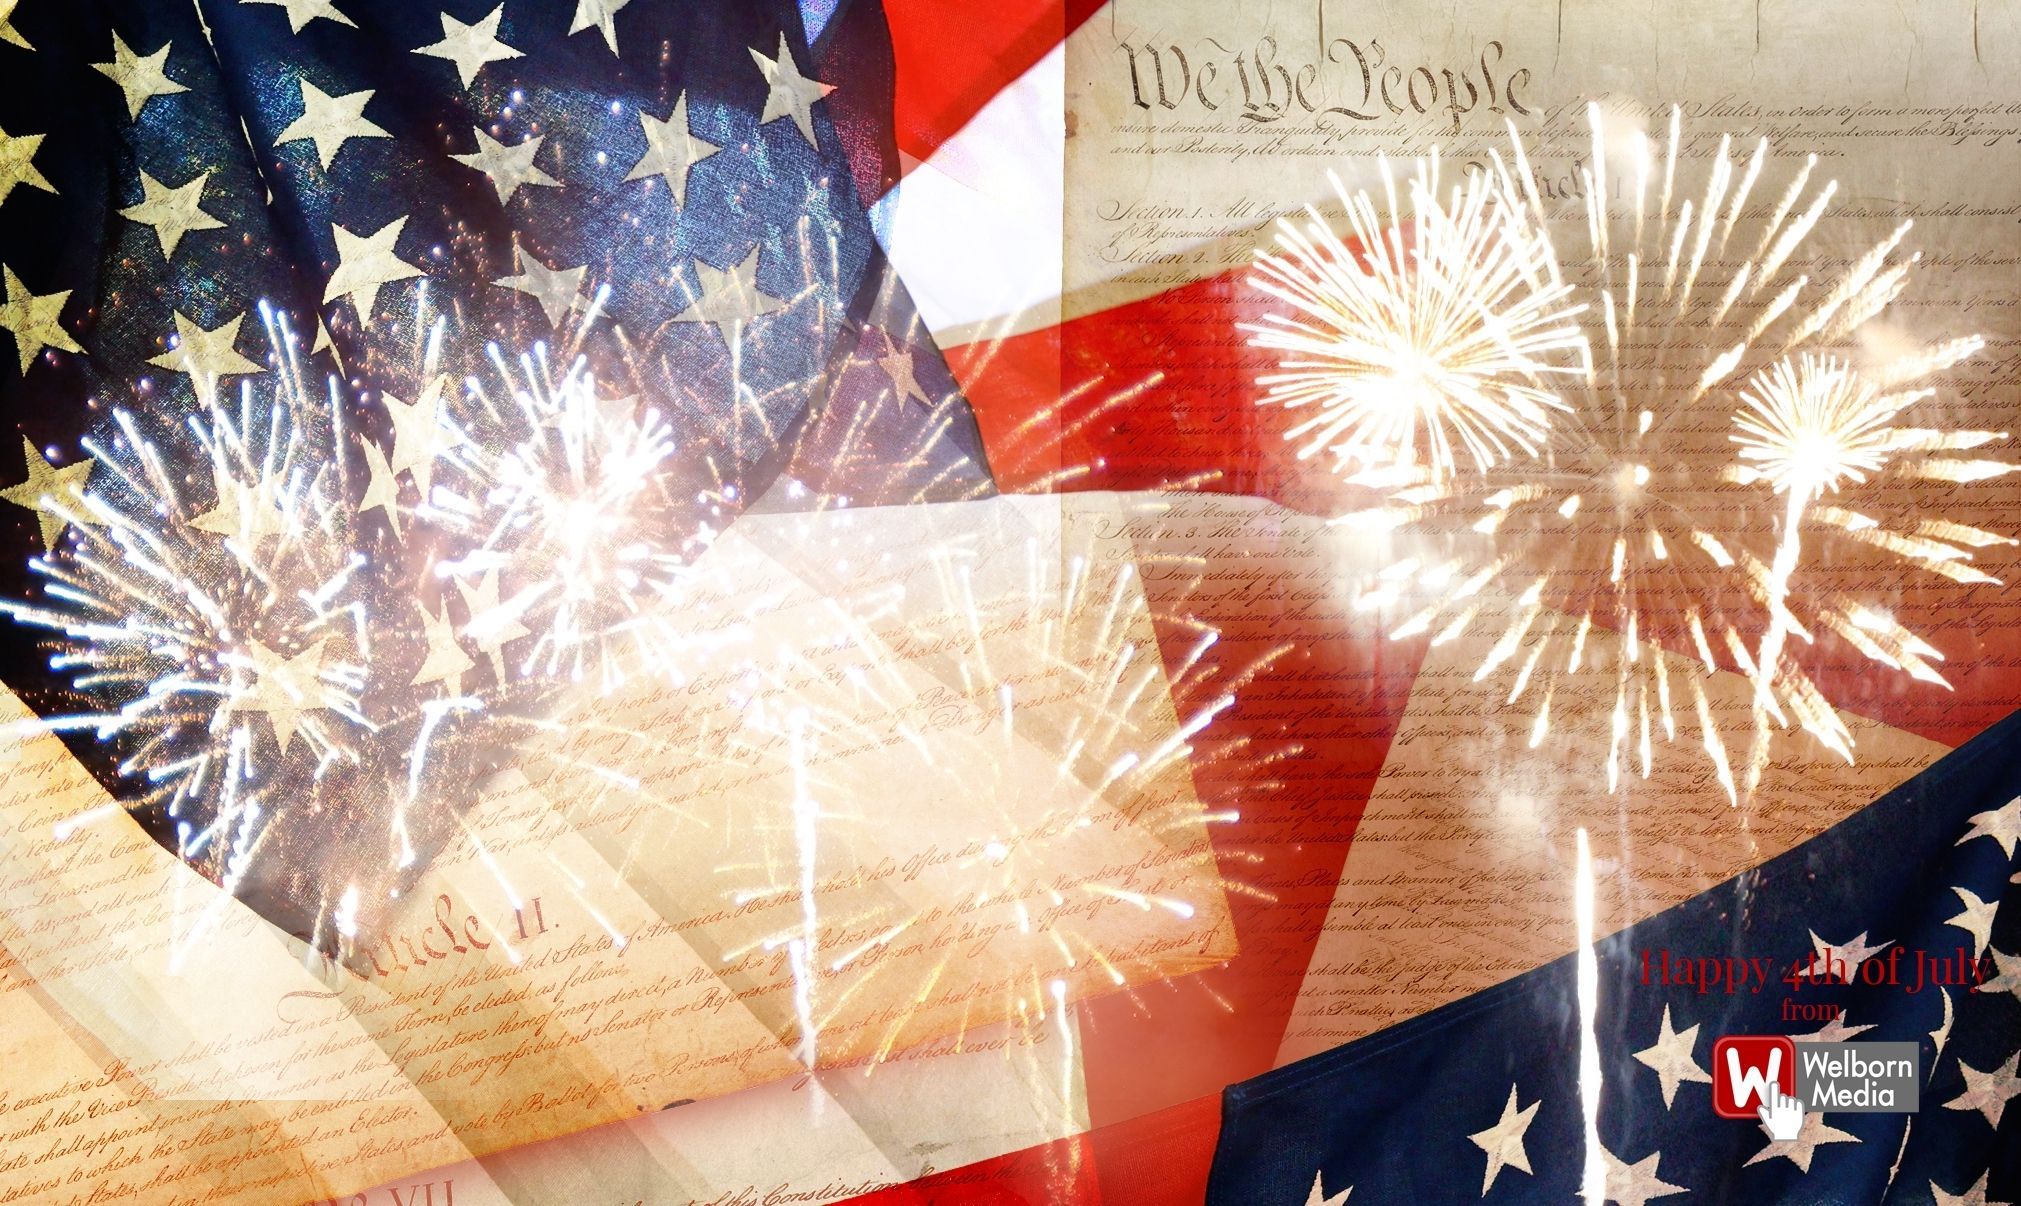 New 4Th Of July Wallpaper Free Download FULL HD 1080p For PC Desktopth of july wallpaper, Wallpaper free download, 4th of july